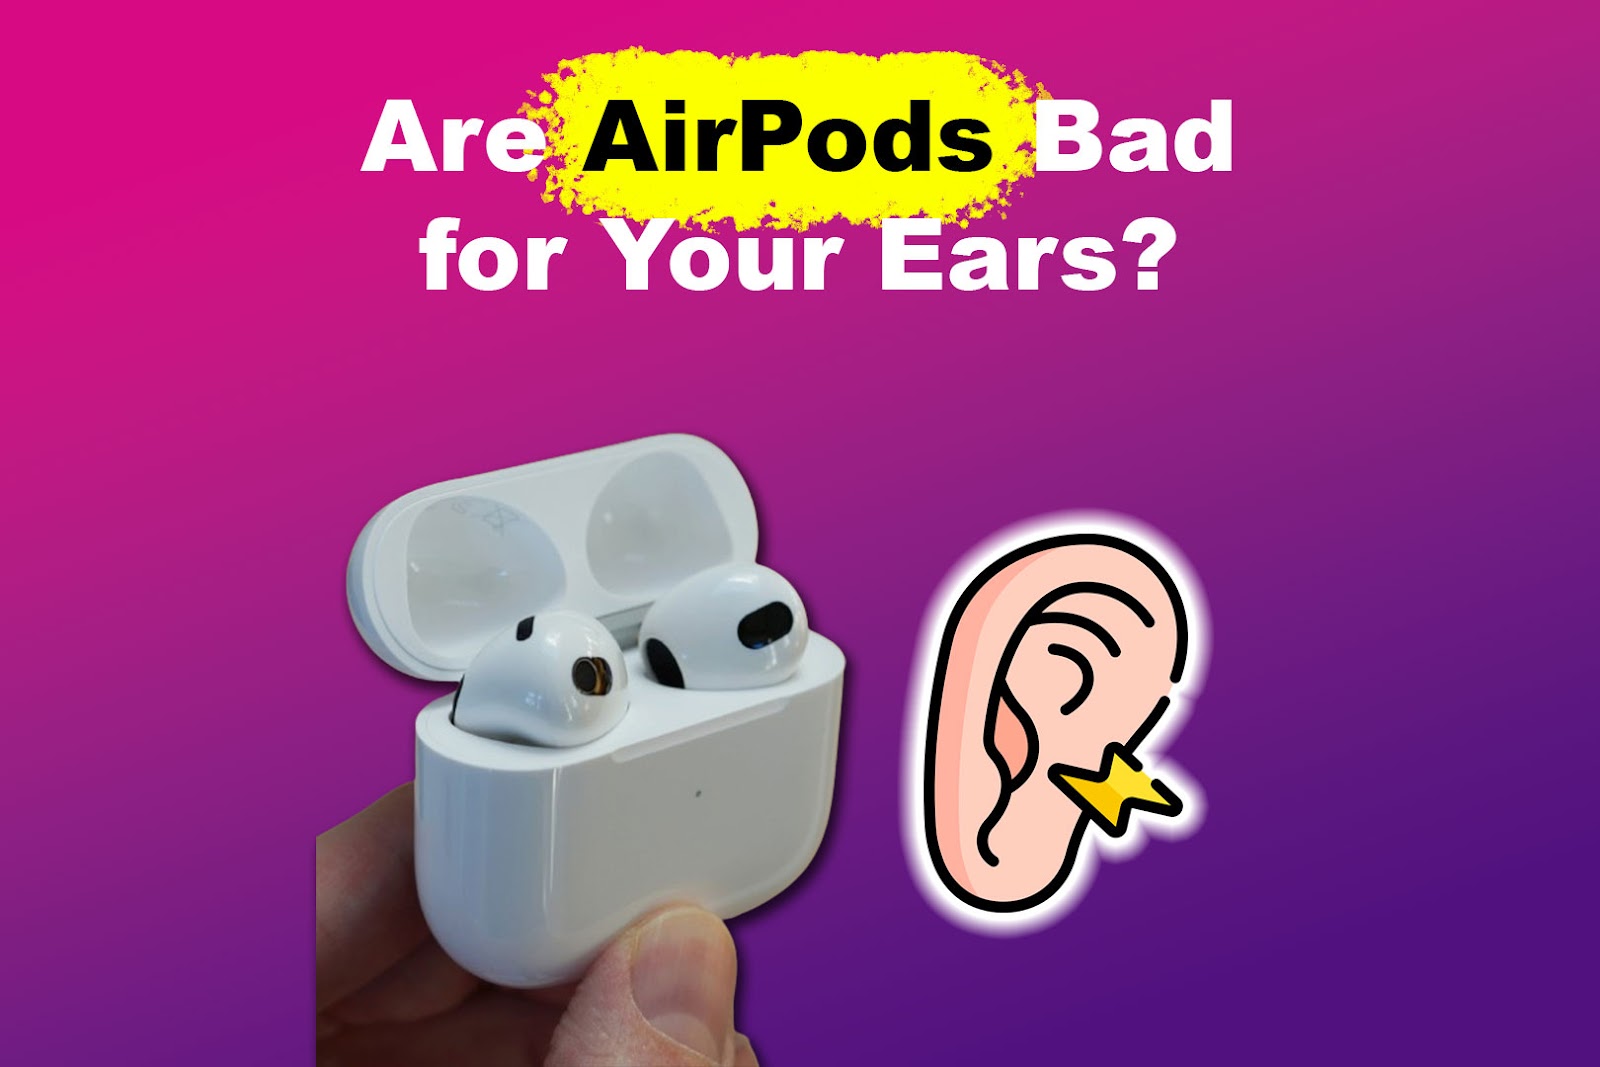 Are AirPods Bad for Your Ears